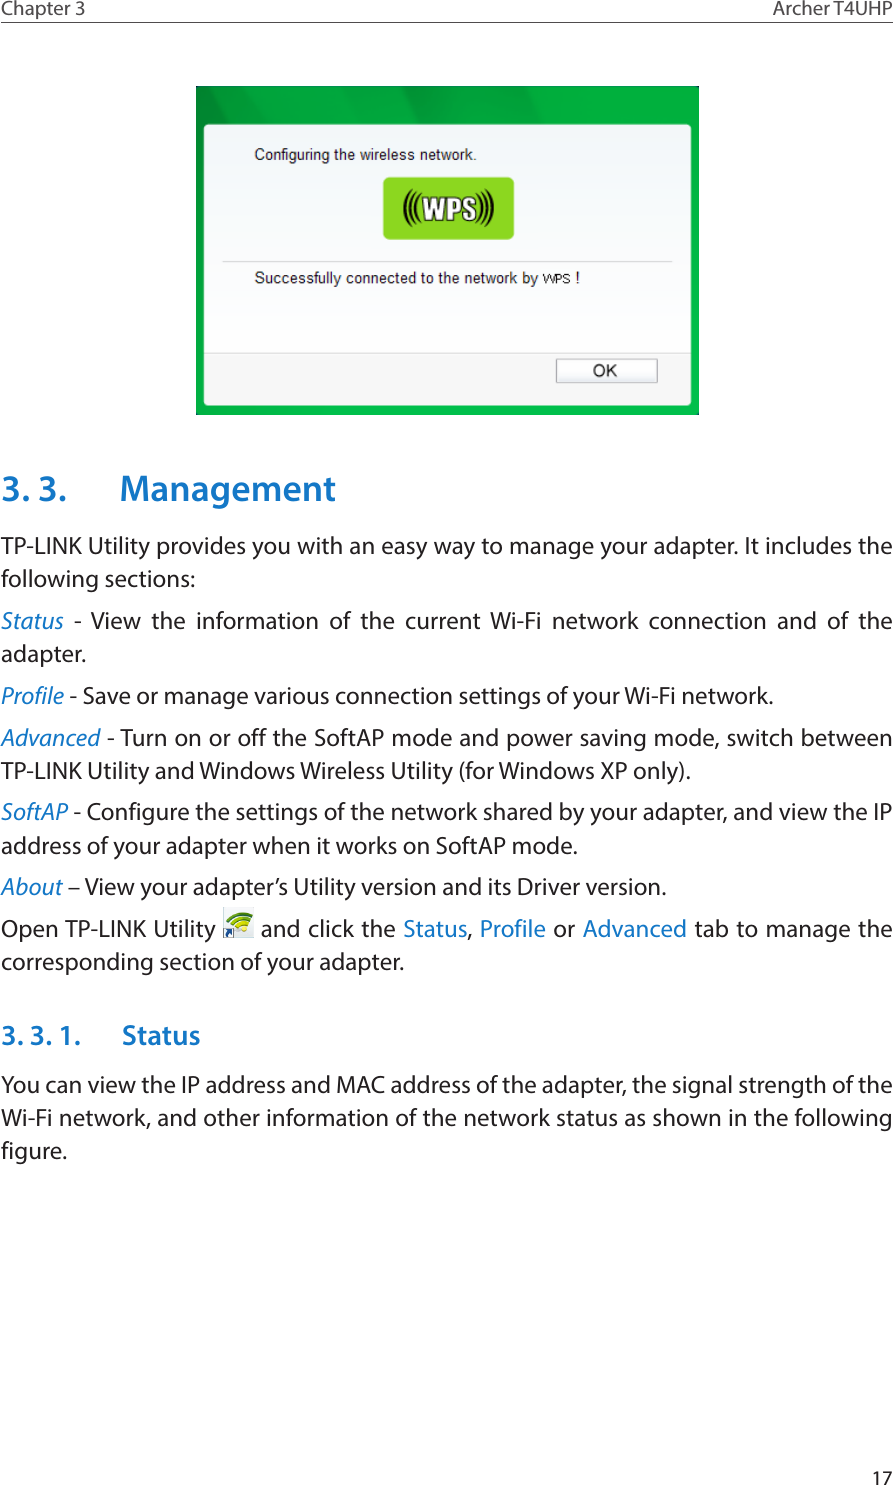 17Chapter 3 Archer T4UHP3. 3.  ManagementTP-LINK Utility provides you with an easy way to manage your adapter. It includes the following sections:Status - View the information of the current Wi-Fi network connection and of the adapter.Profile - Save or manage various connection settings of your Wi-Fi network.Advanced - Turn on or off the SoftAP mode and power saving mode, switch between TP-LINK Utility and Windows Wireless Utility (for Windows XP only).SoftAP - Configure the settings of the network shared by your adapter, and view the IP address of your adapter when it works on SoftAP mode.About – View your adapter’s Utility version and its Driver version.Open TP-LINK Utility   and click the Status, Profile or Advanced tab to manage the corresponding section of your adapter.3. 3. 1.  StatusYou can view the IP address and MAC address of the adapter, the signal strength of the Wi-Fi network, and other information of the network status as shown in the following figure.